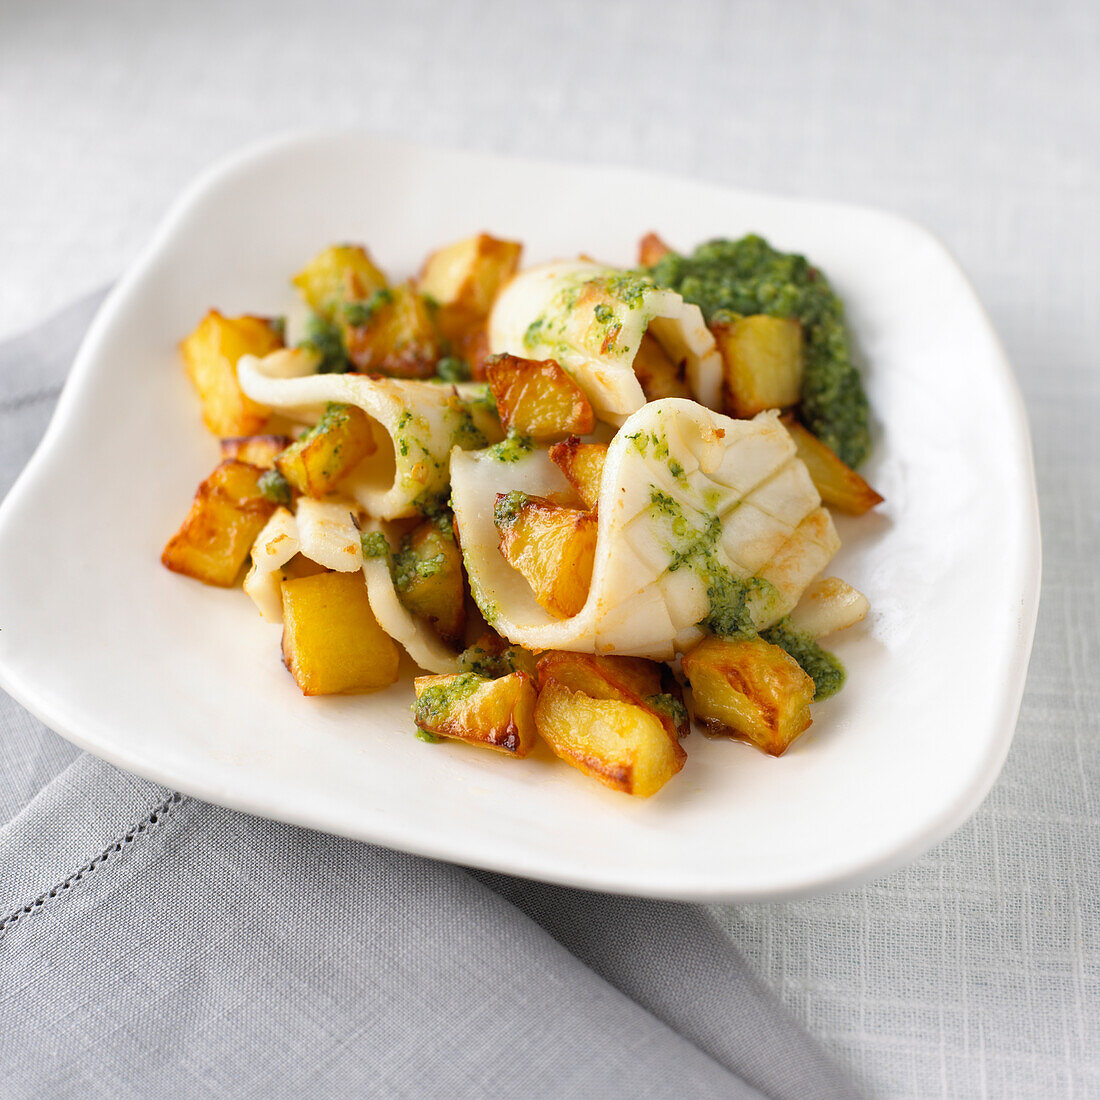 Roasted squid and potato with spiced coriander pesto